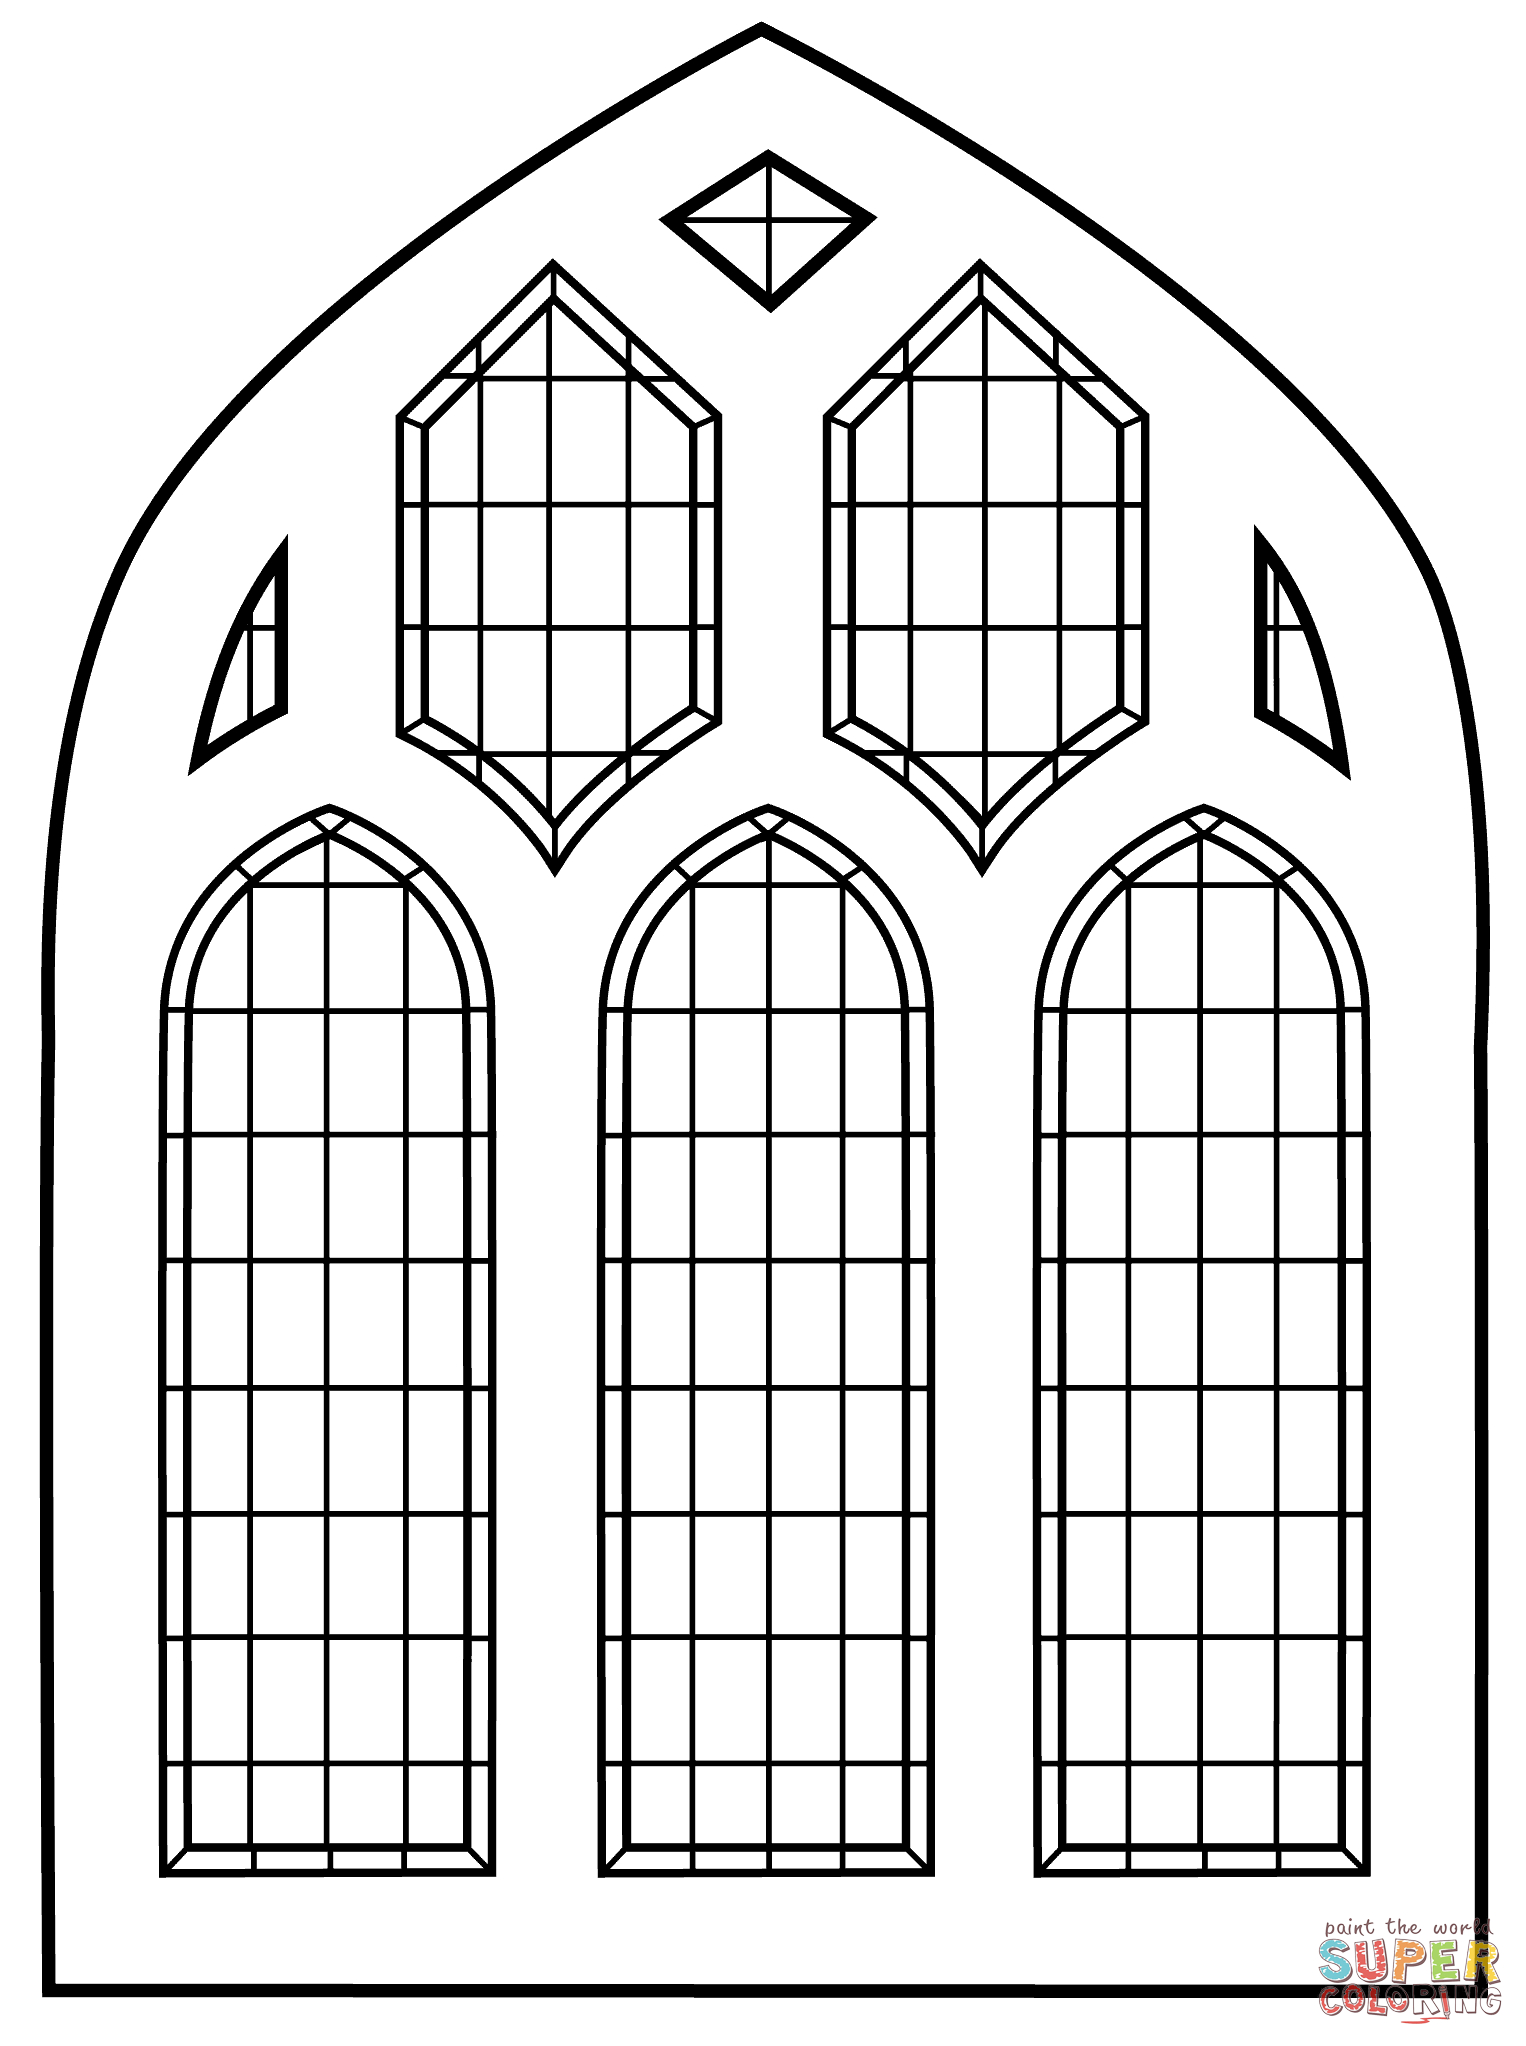 Stained Glass Coloring Pages | Free Coloring Pages - Free Printable Religious Stained Glass Patterns